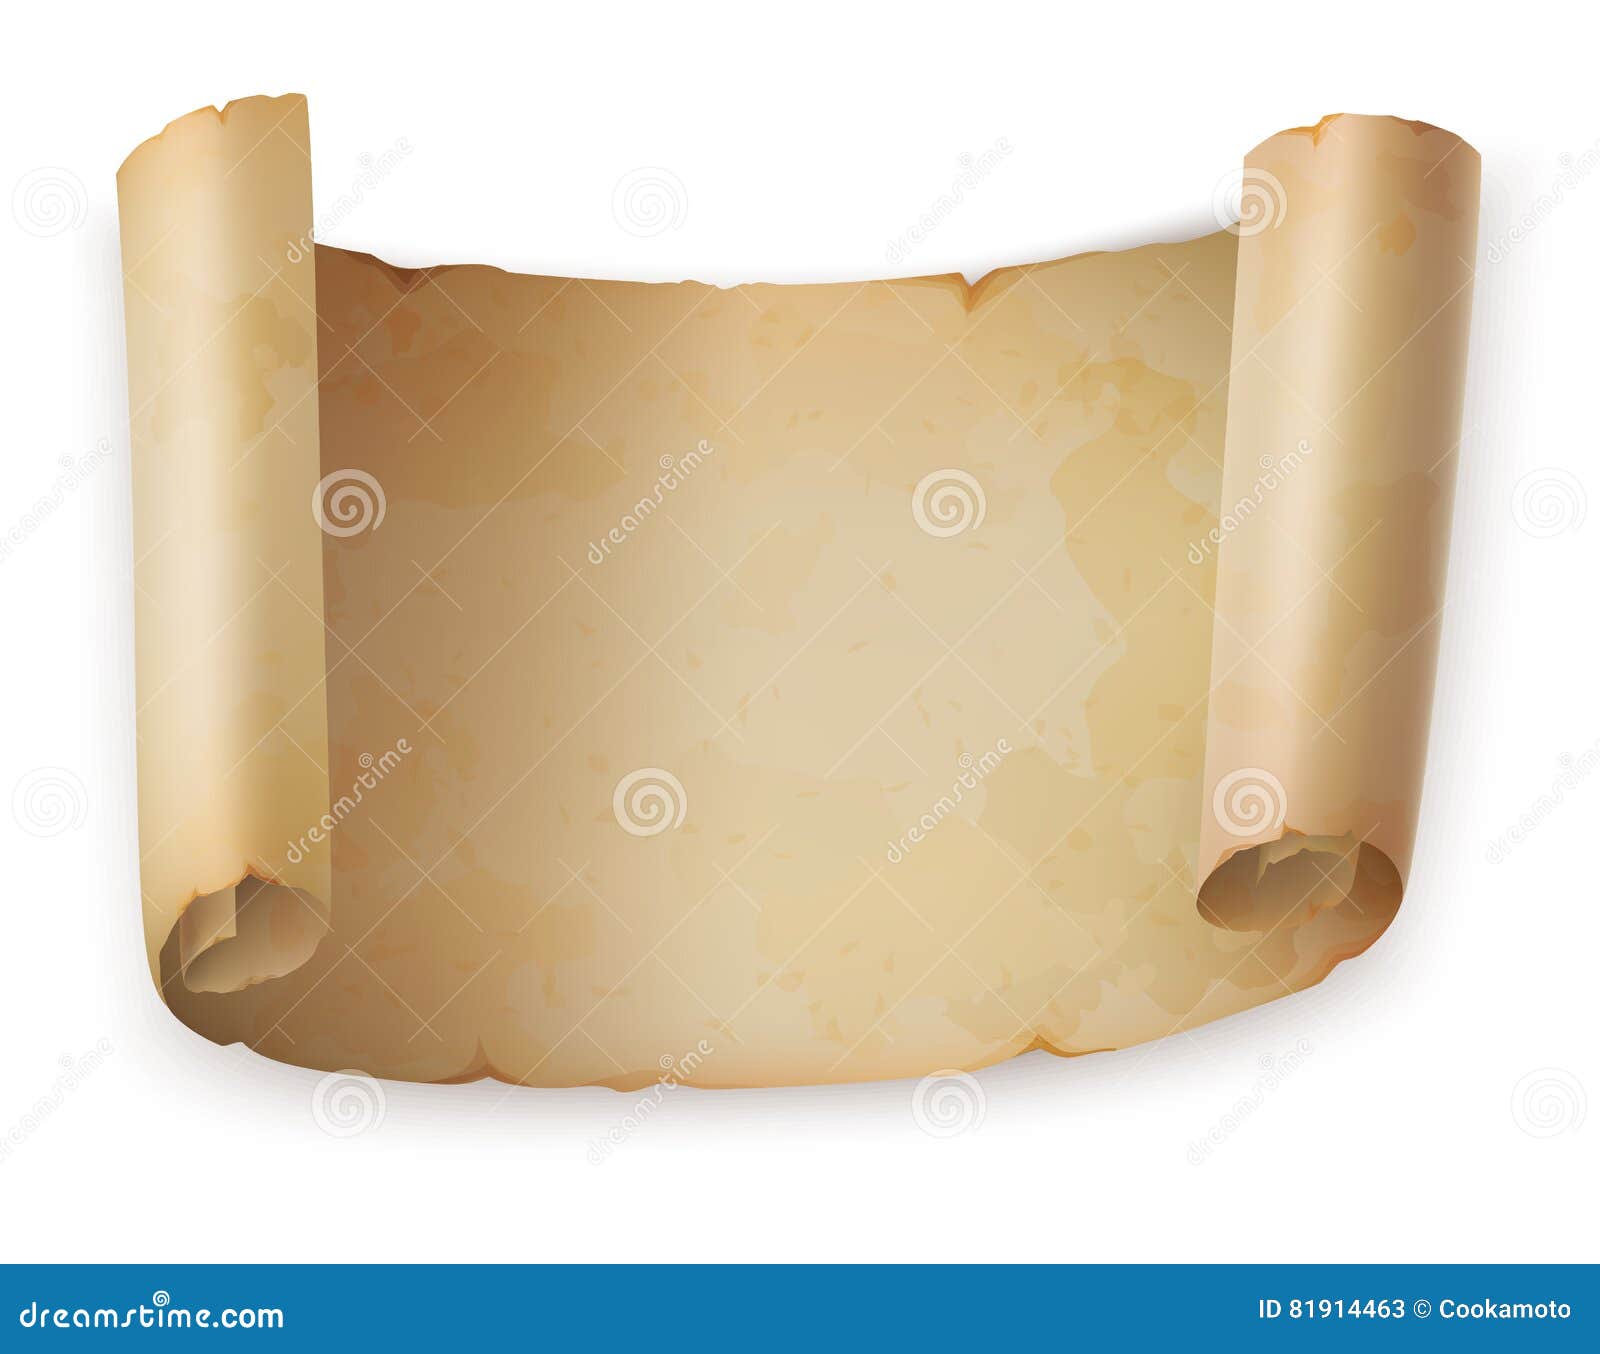 https://thumbs.dreamstime.com/z/old-scroll-roll-vintage-parchment-ancient-paper-blank-papyrus-obsolete-background-may-be-used-rolled-81914463.jpg